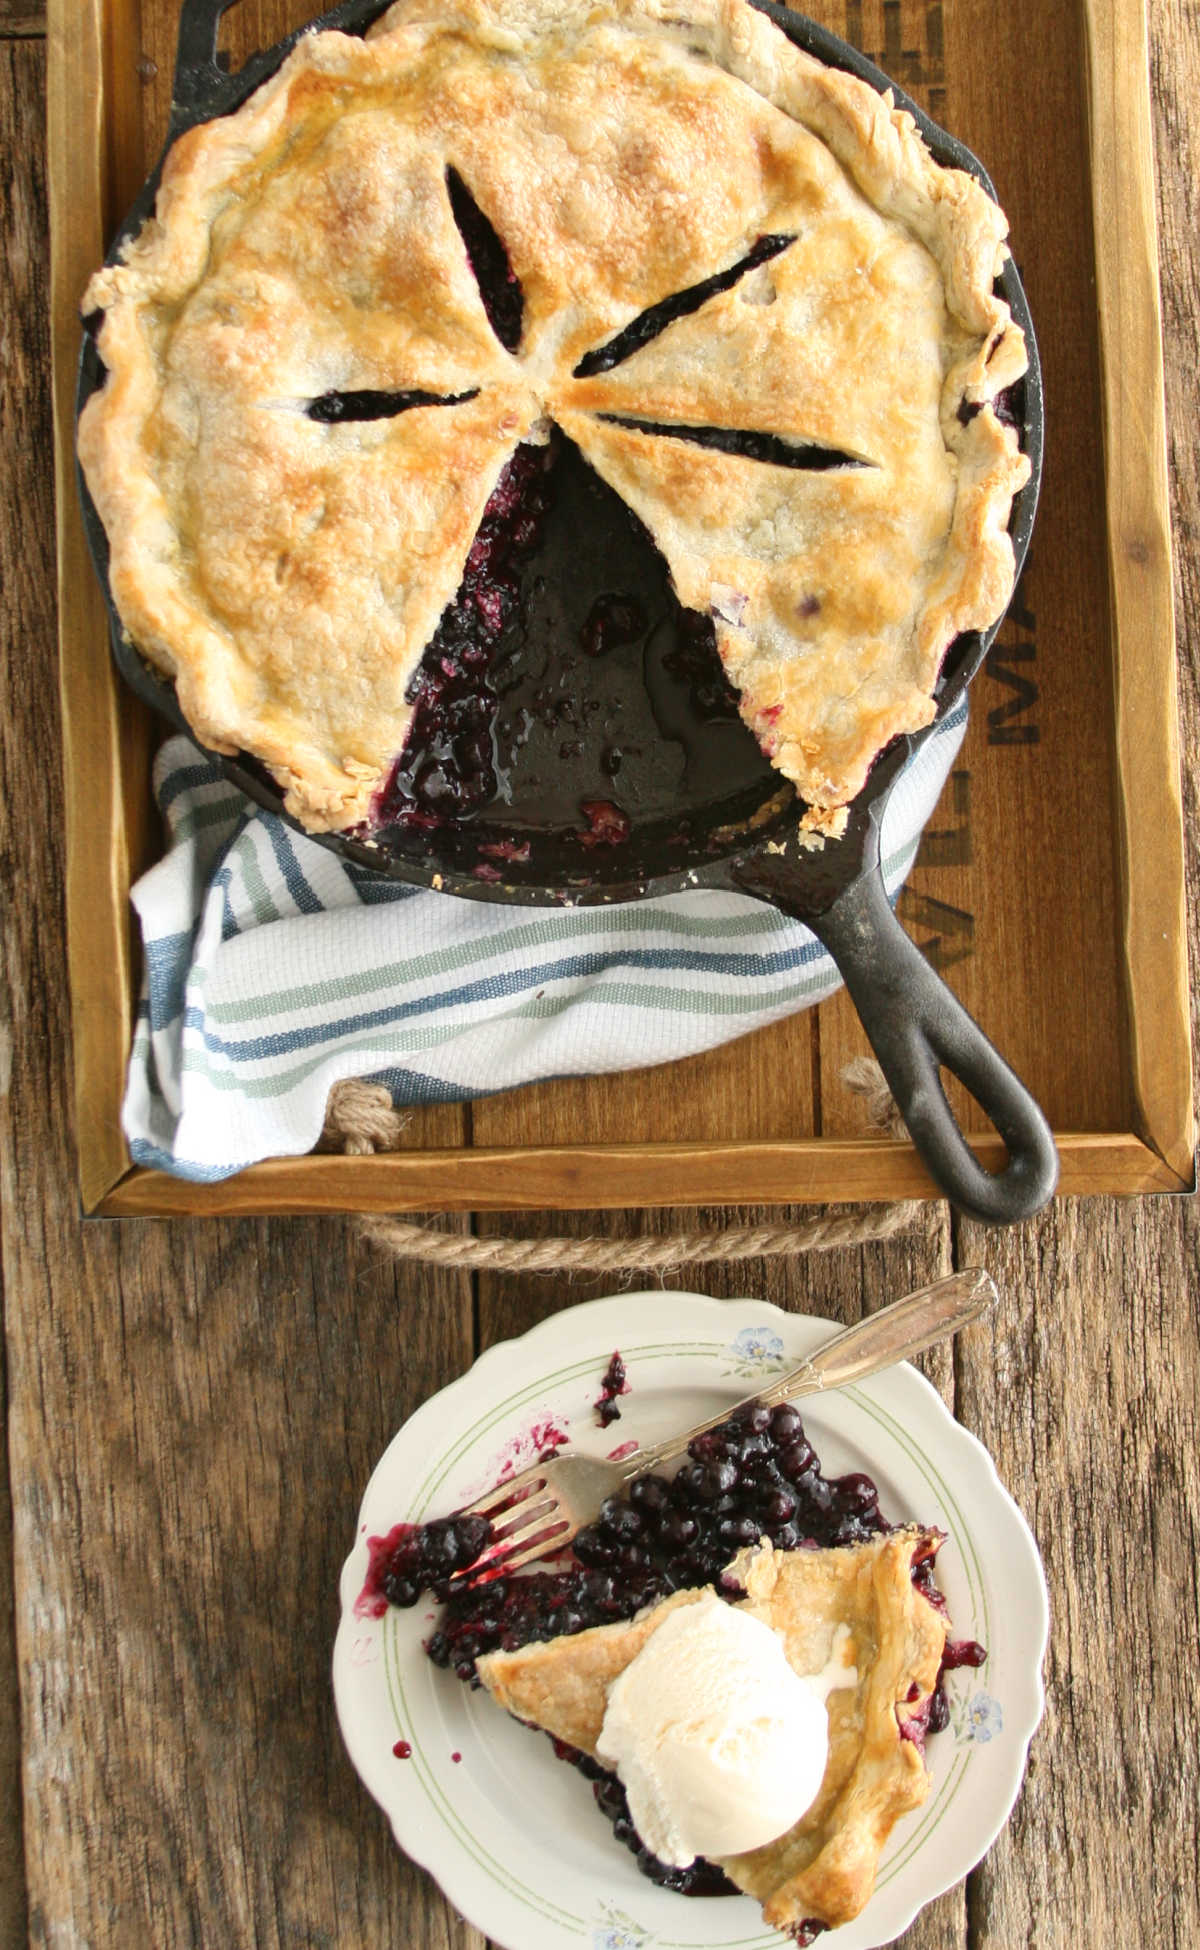 Blueberry pie in cast iron skillet on reclaimed wood boards, slice of pie on small white plate.